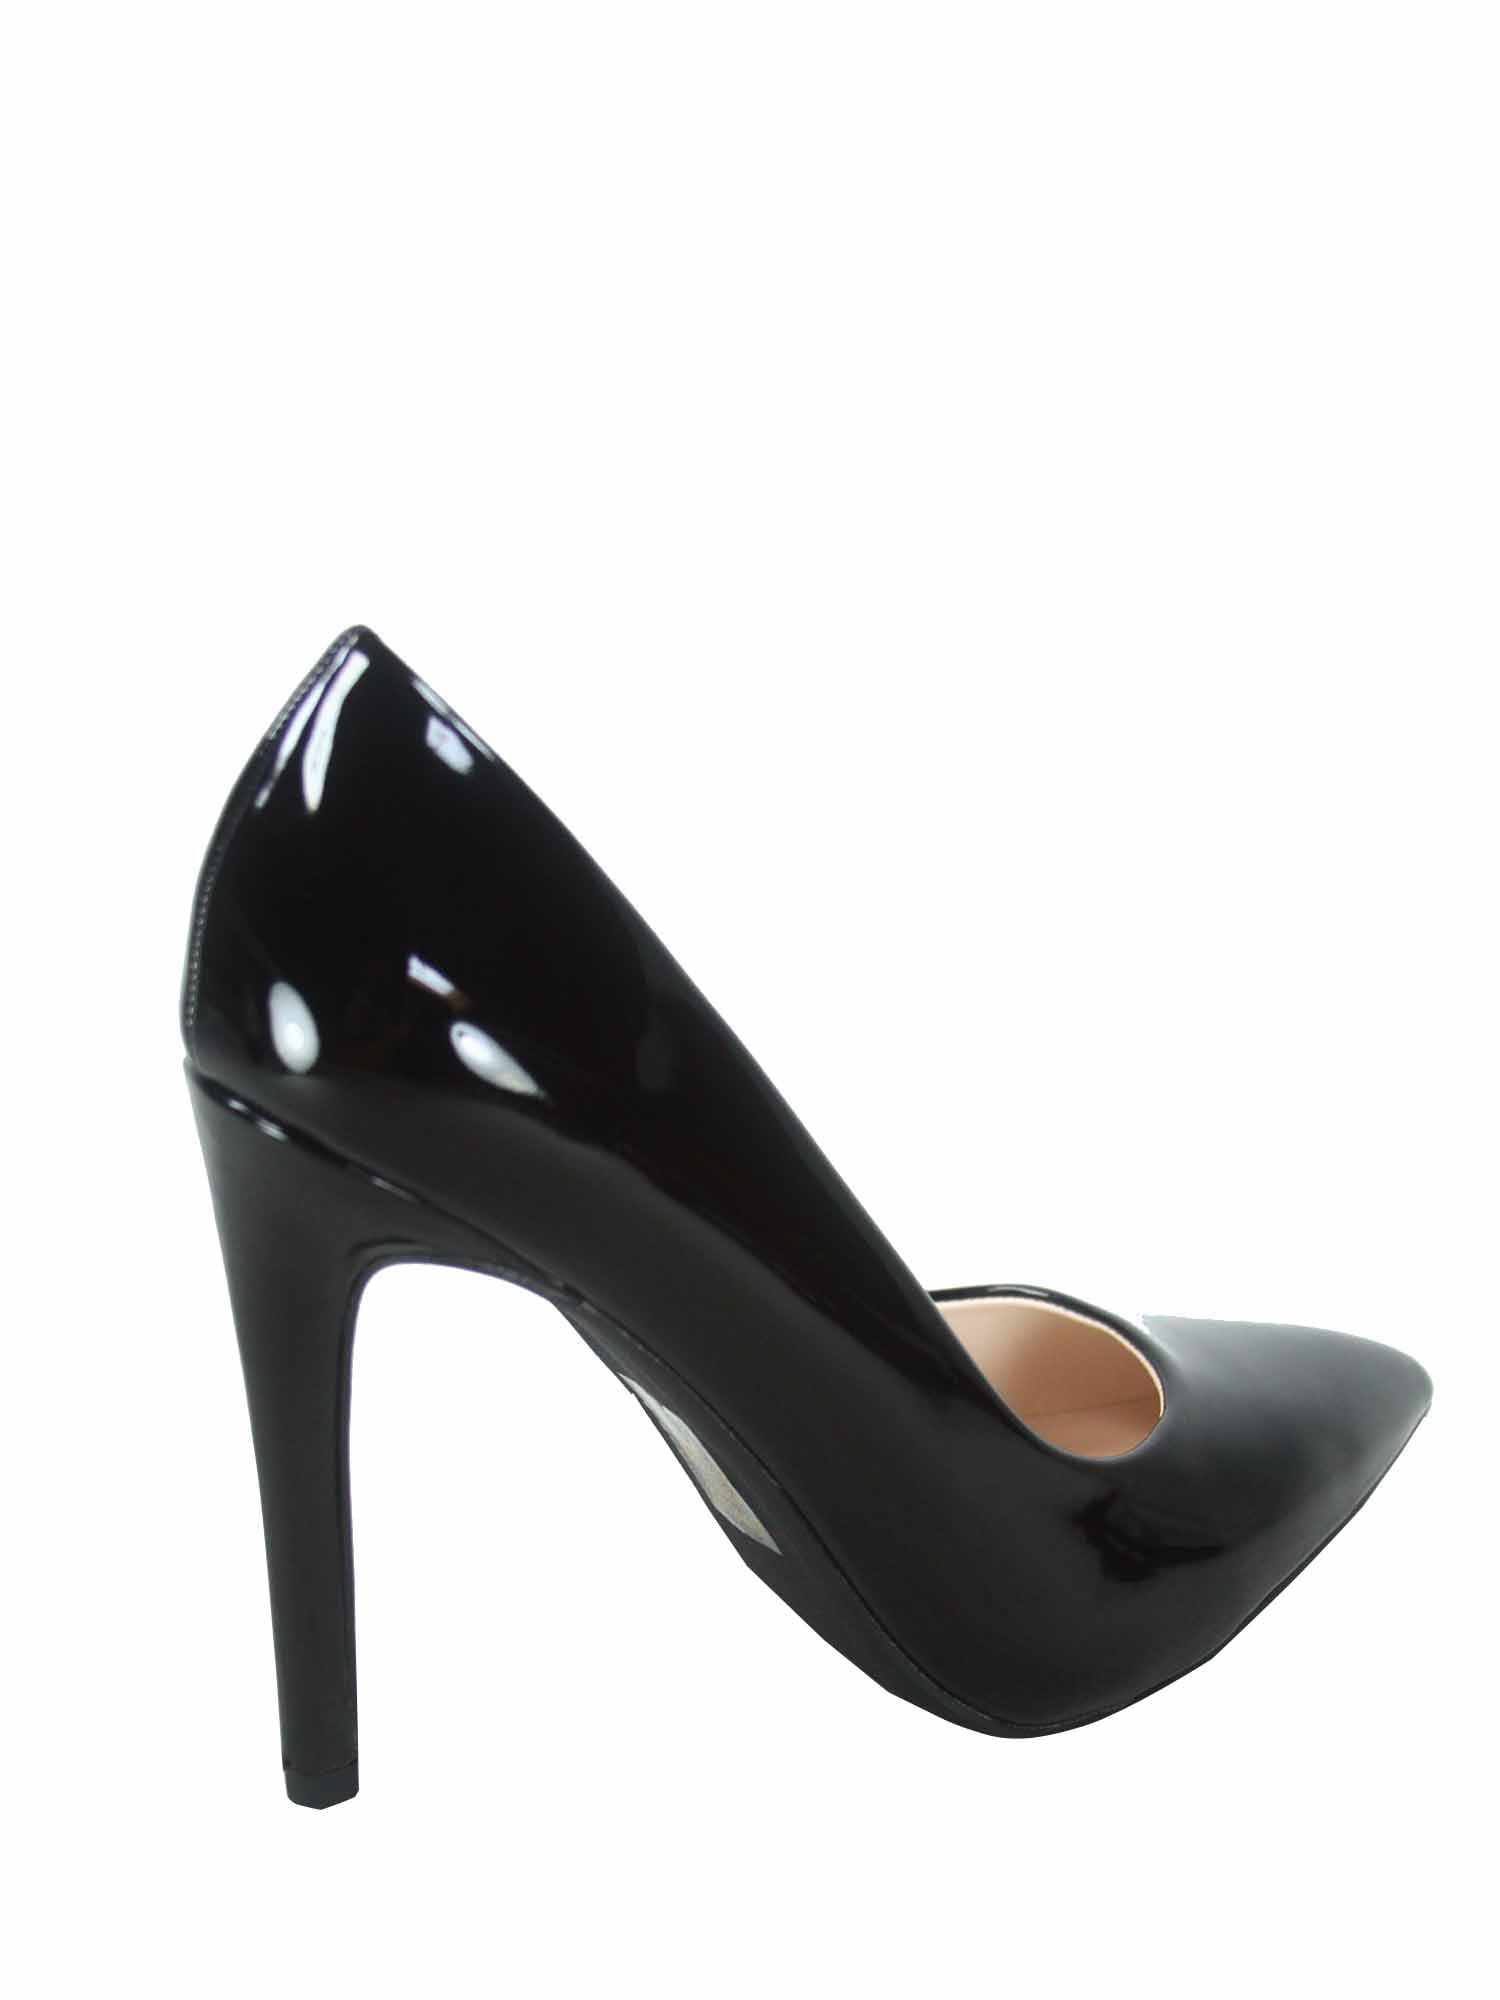 17 Black Heels for Any Occasion and Every Budget | Heels, Black heels,  Fashion shoes